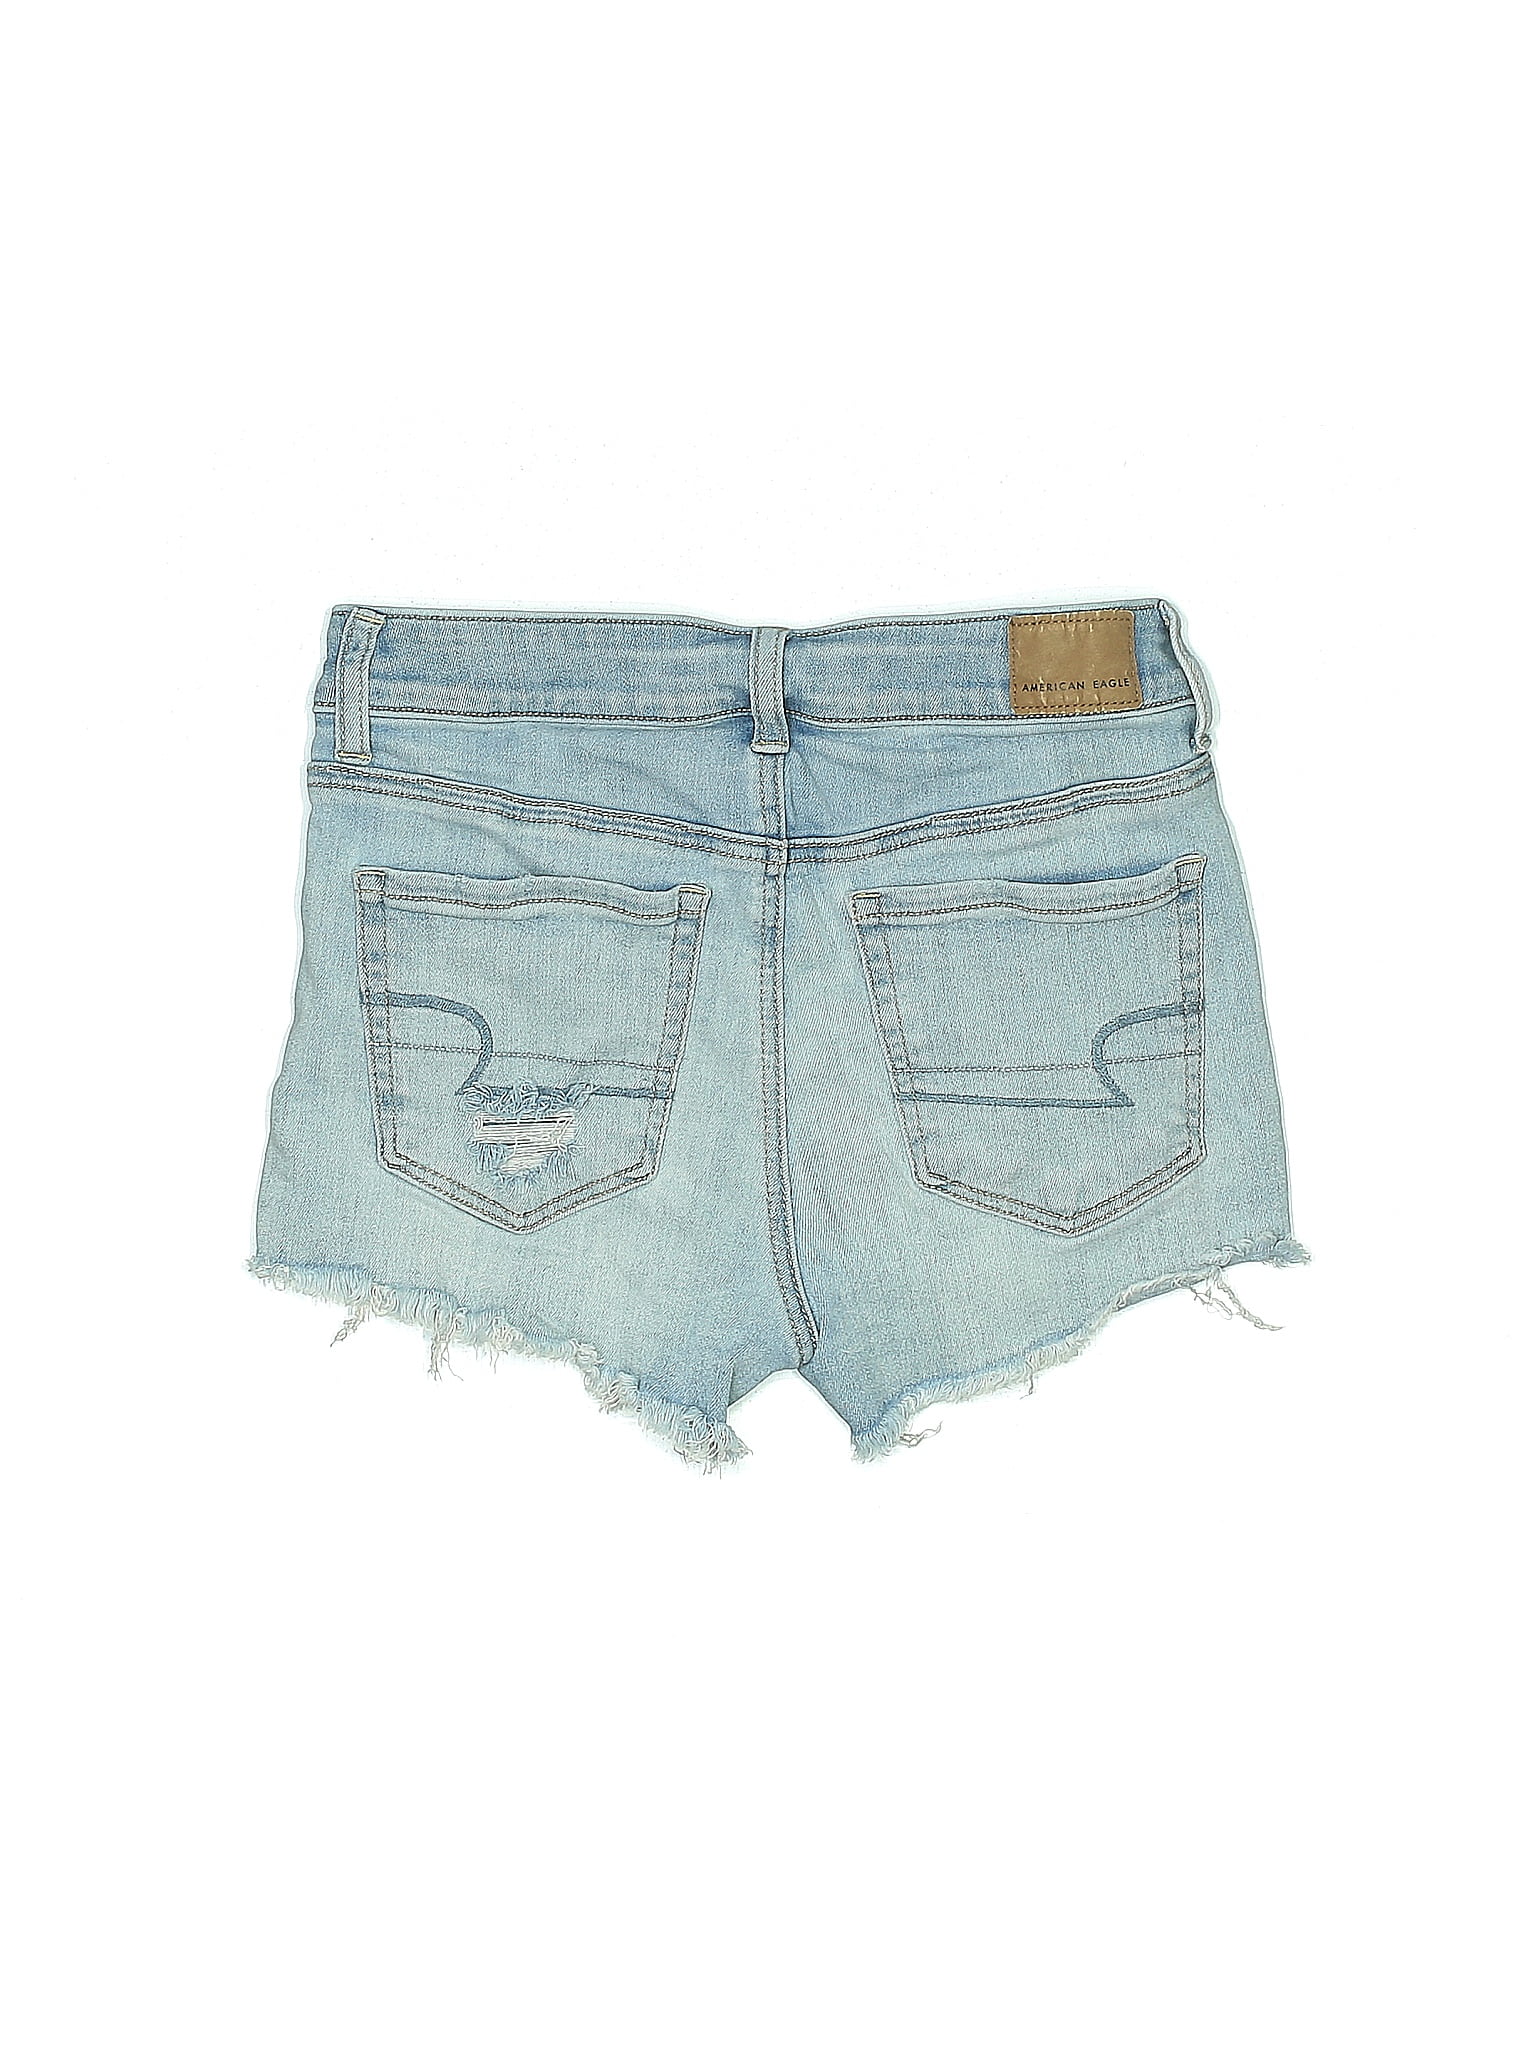 American Eagle Outfitters Women's Shorts On Sale Up To 90% Off Retail